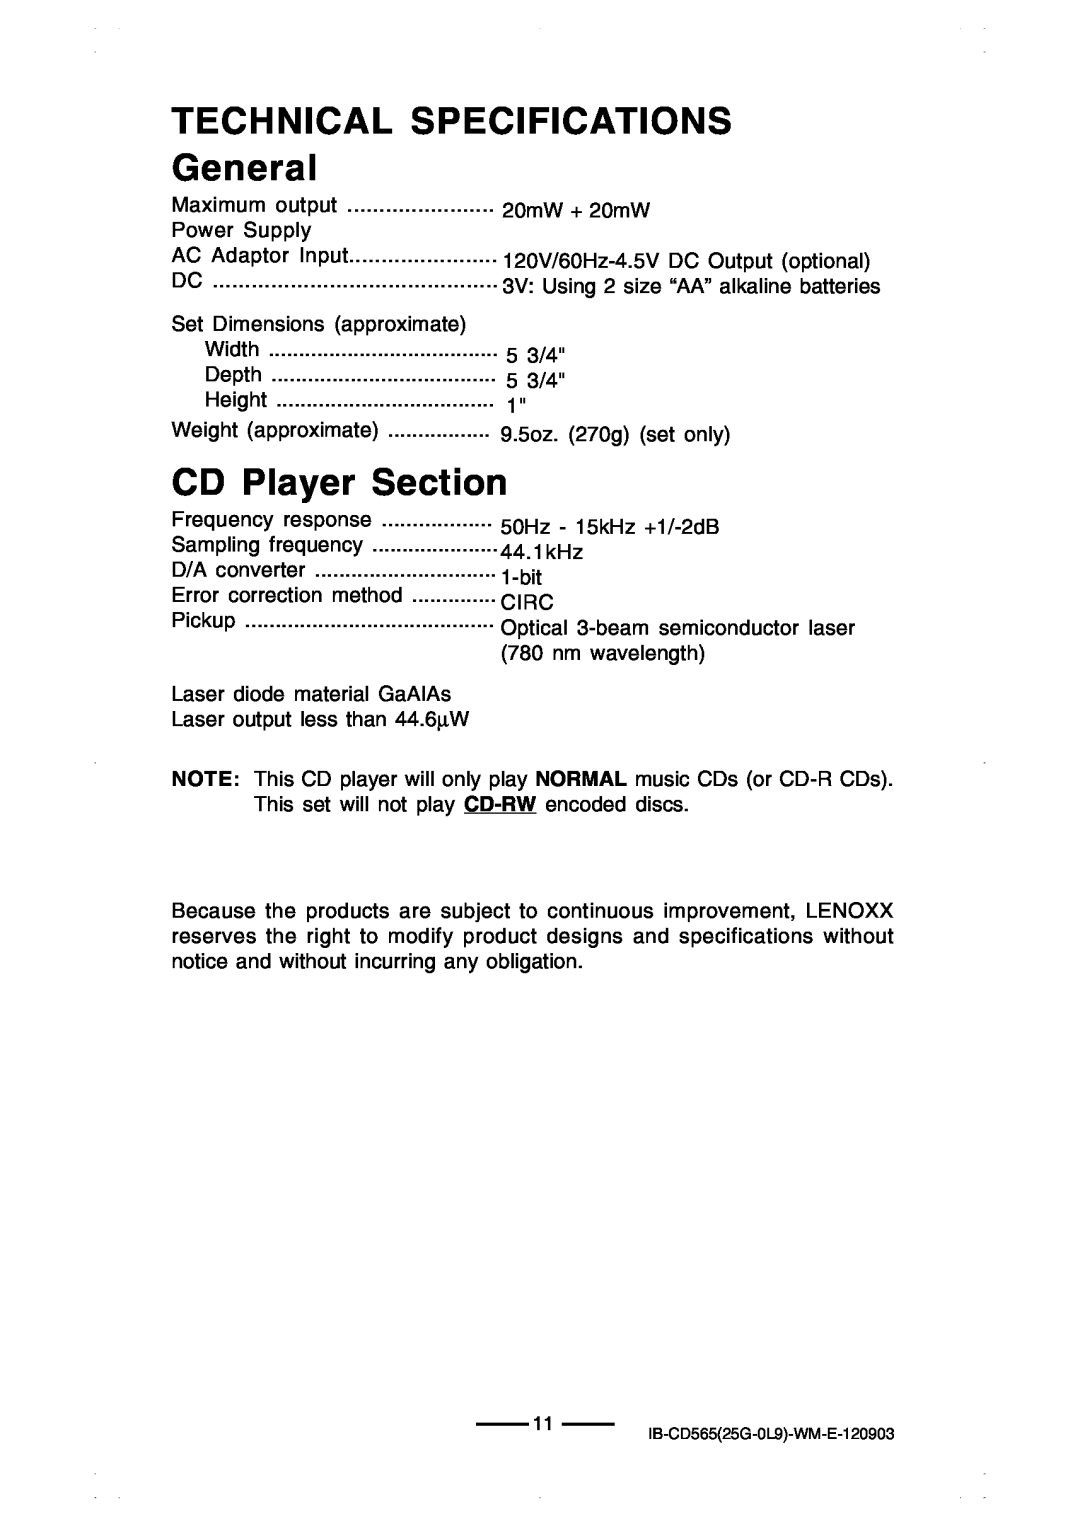 Lenoxx Electronics CD-565 operating instructions TECHNICAL SPECIFICATIONS General, CD Player Section 